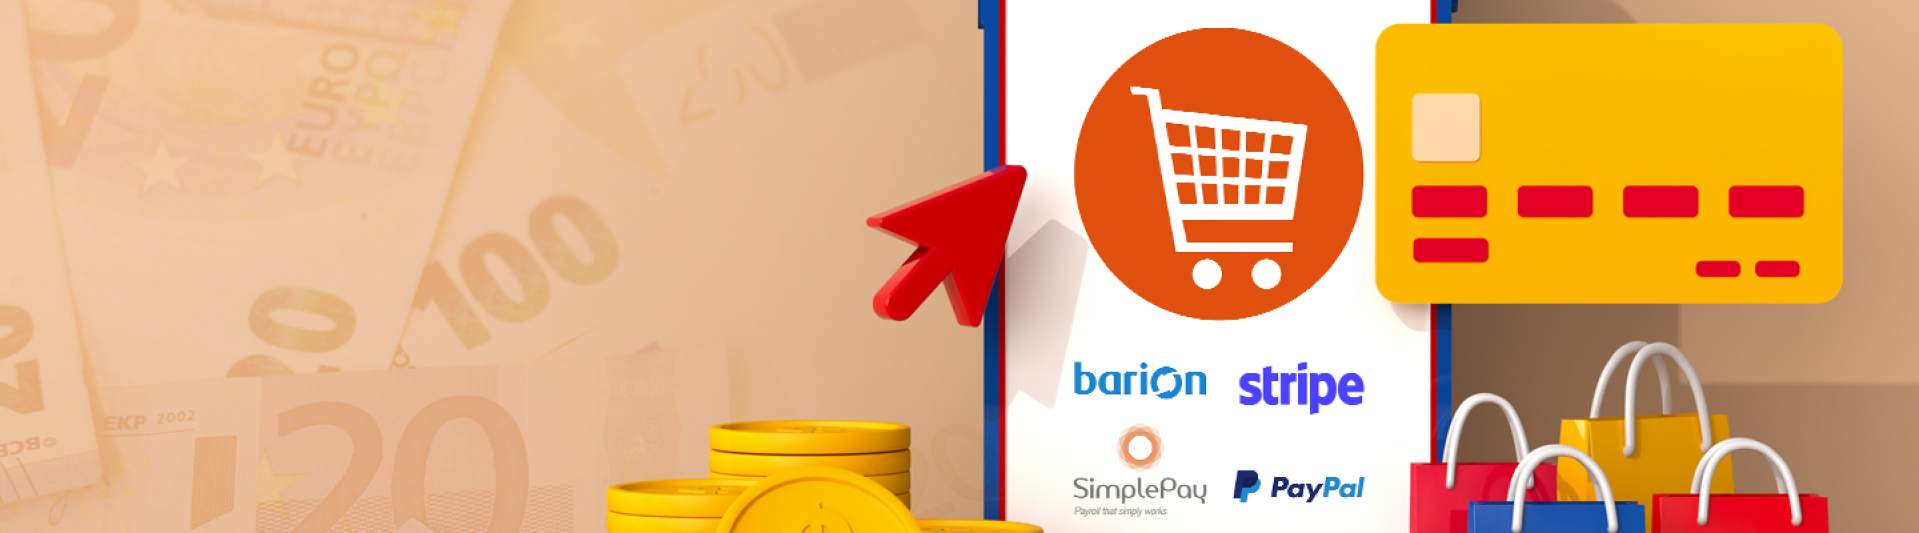 Online credit card payment banner image with barion, stripe, simple pay, and paypal logos